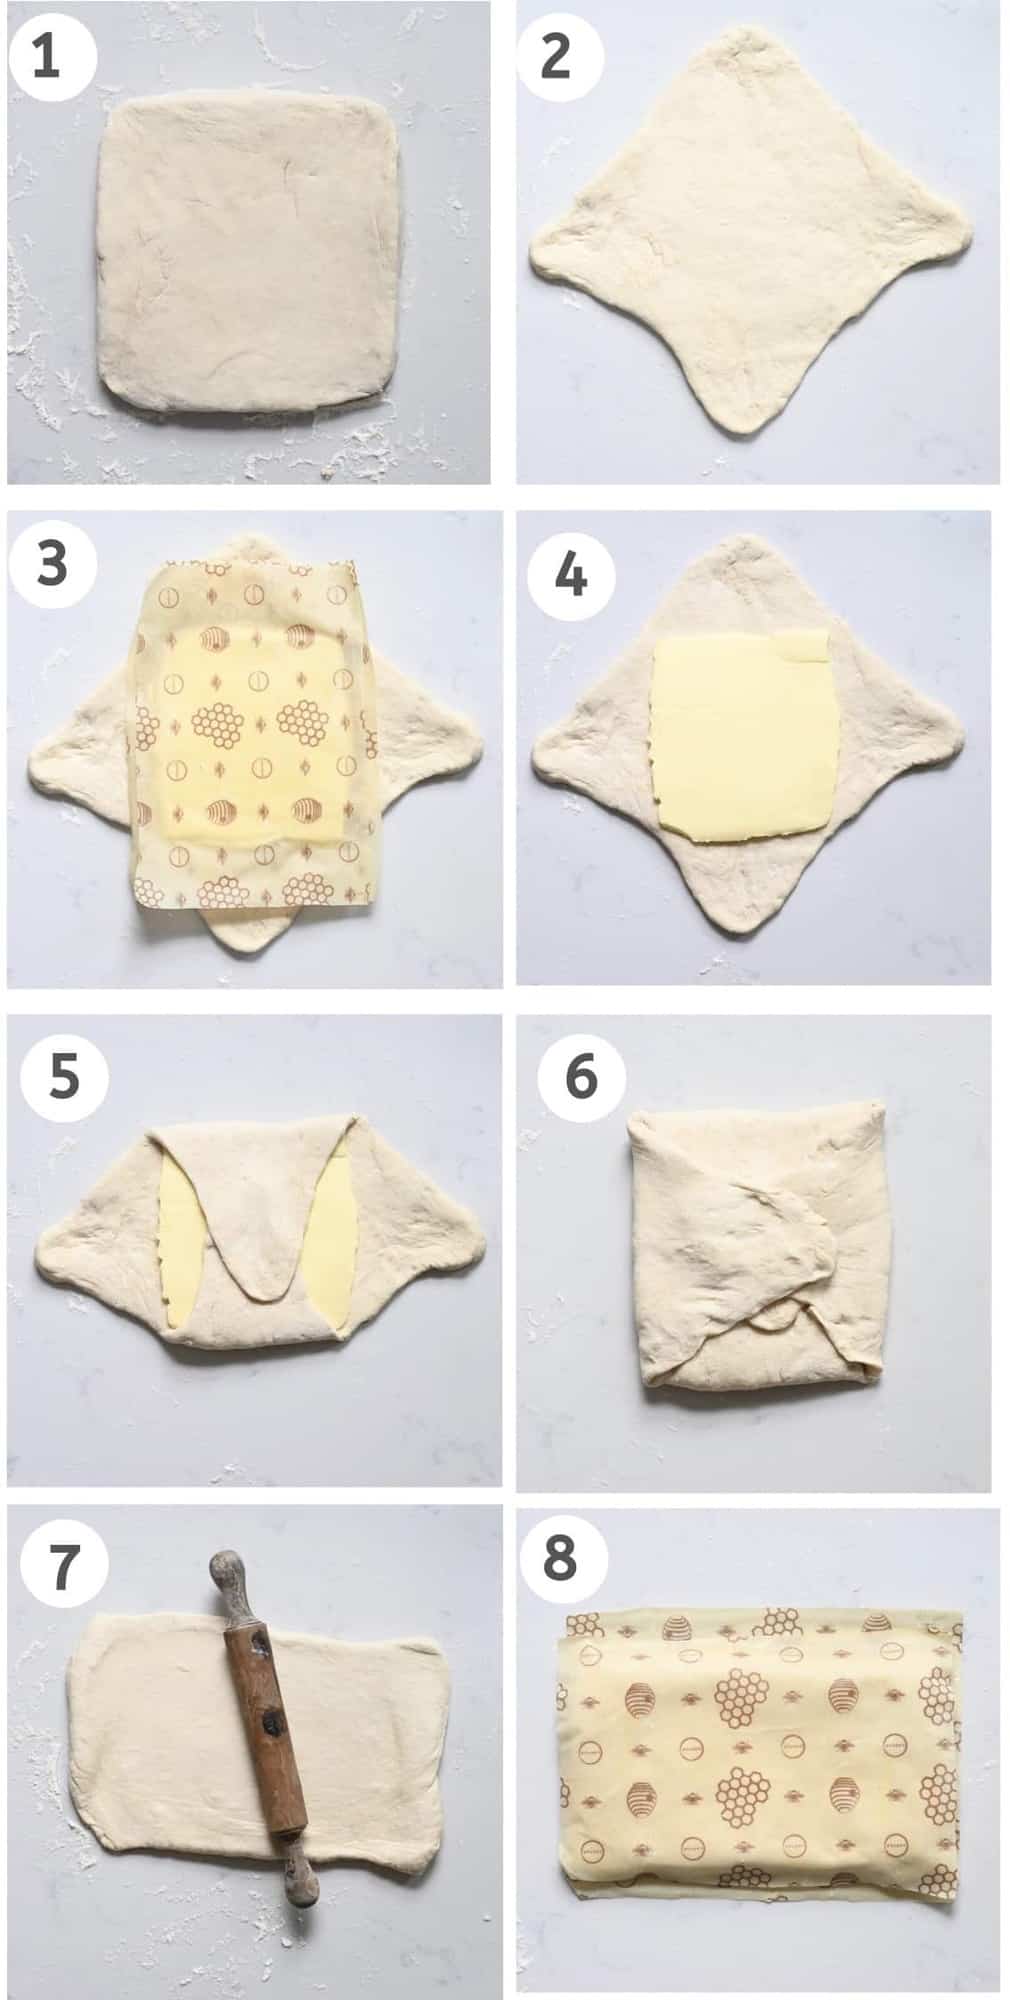 Steps to place butter inside the croissant dough